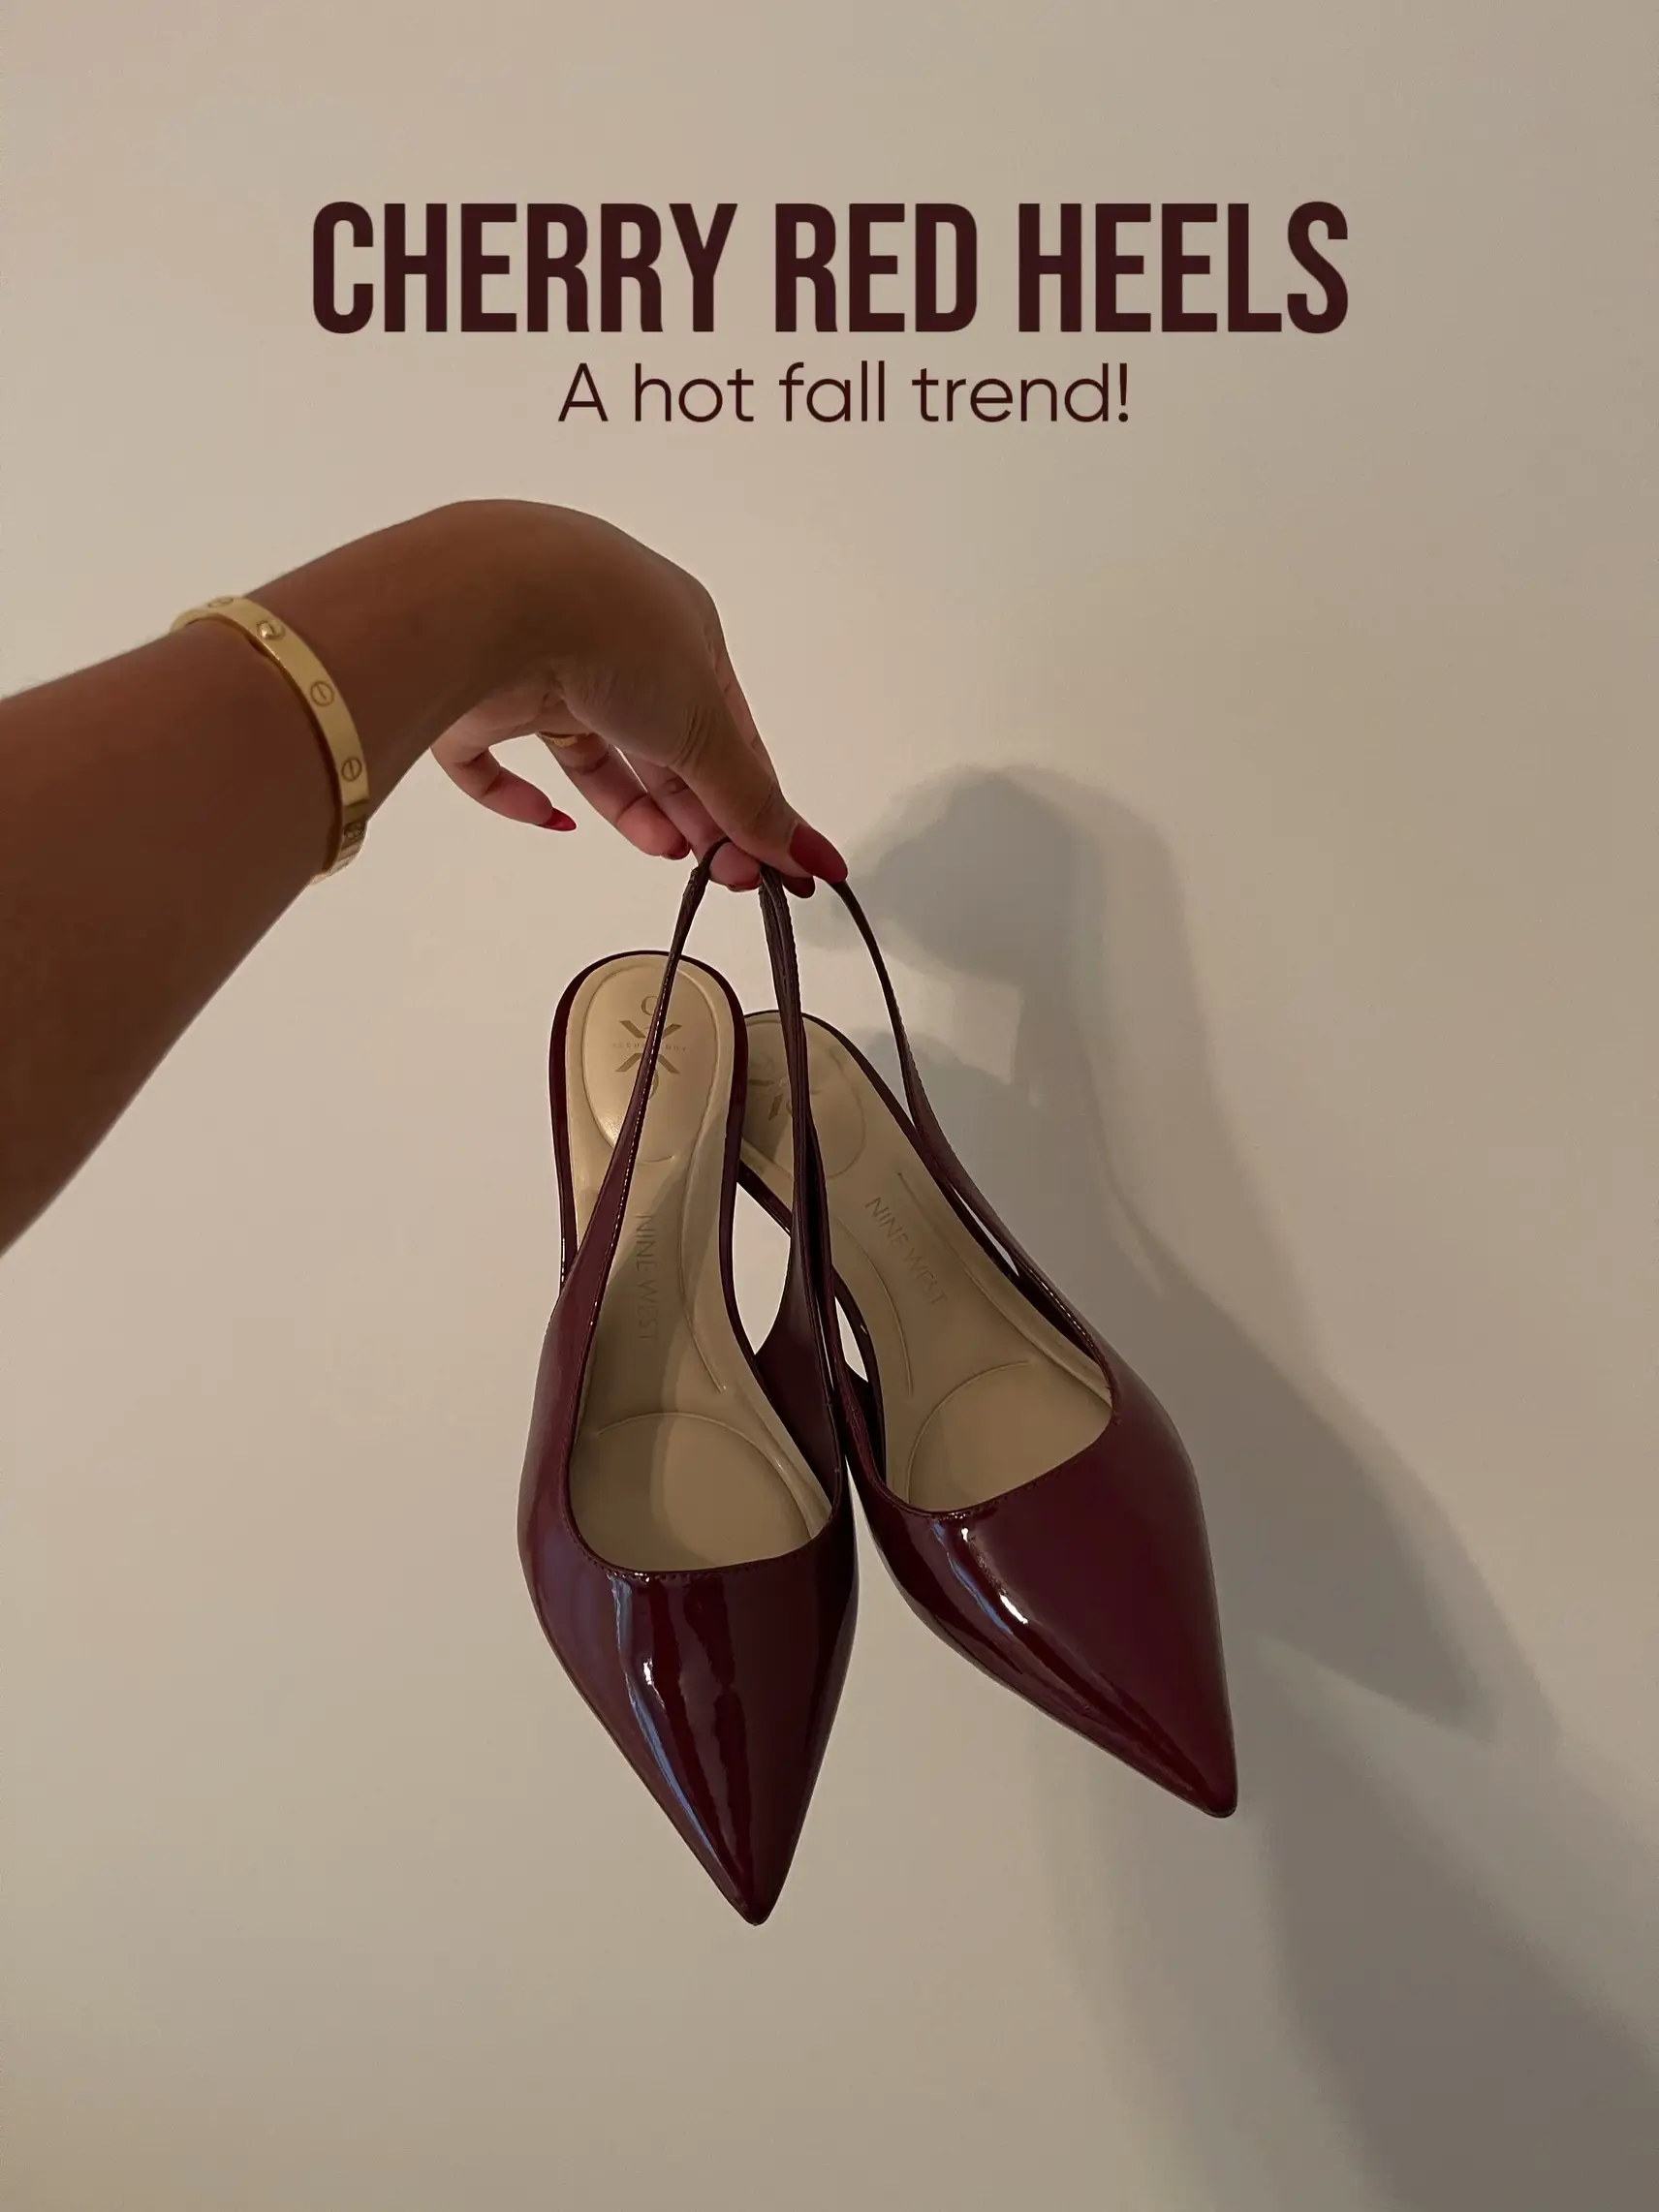 Cherry Red Heels - Hot fall trend!🍒 | Gallery posted by NishaSarath ...